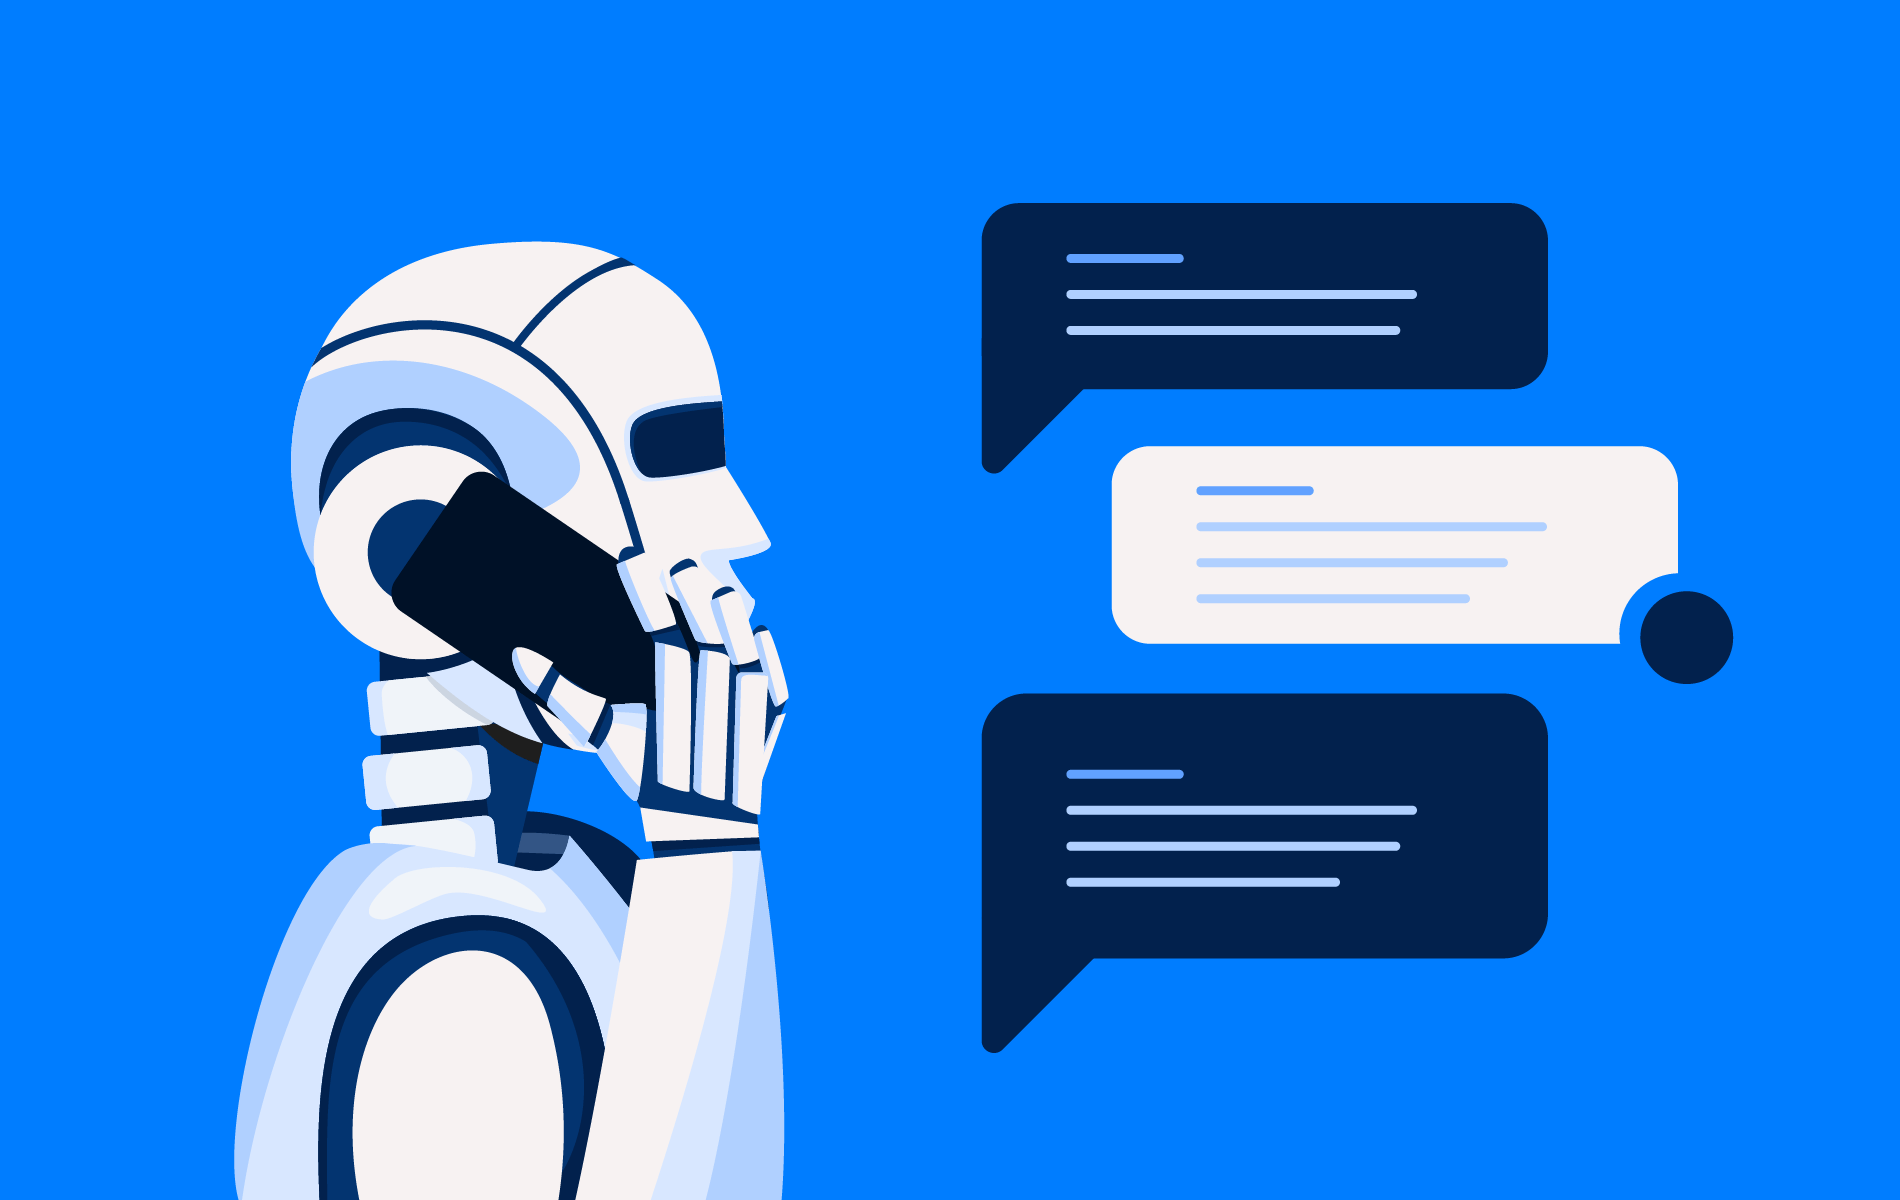 An abstract illustration of Ai and a helpdesk conversation.